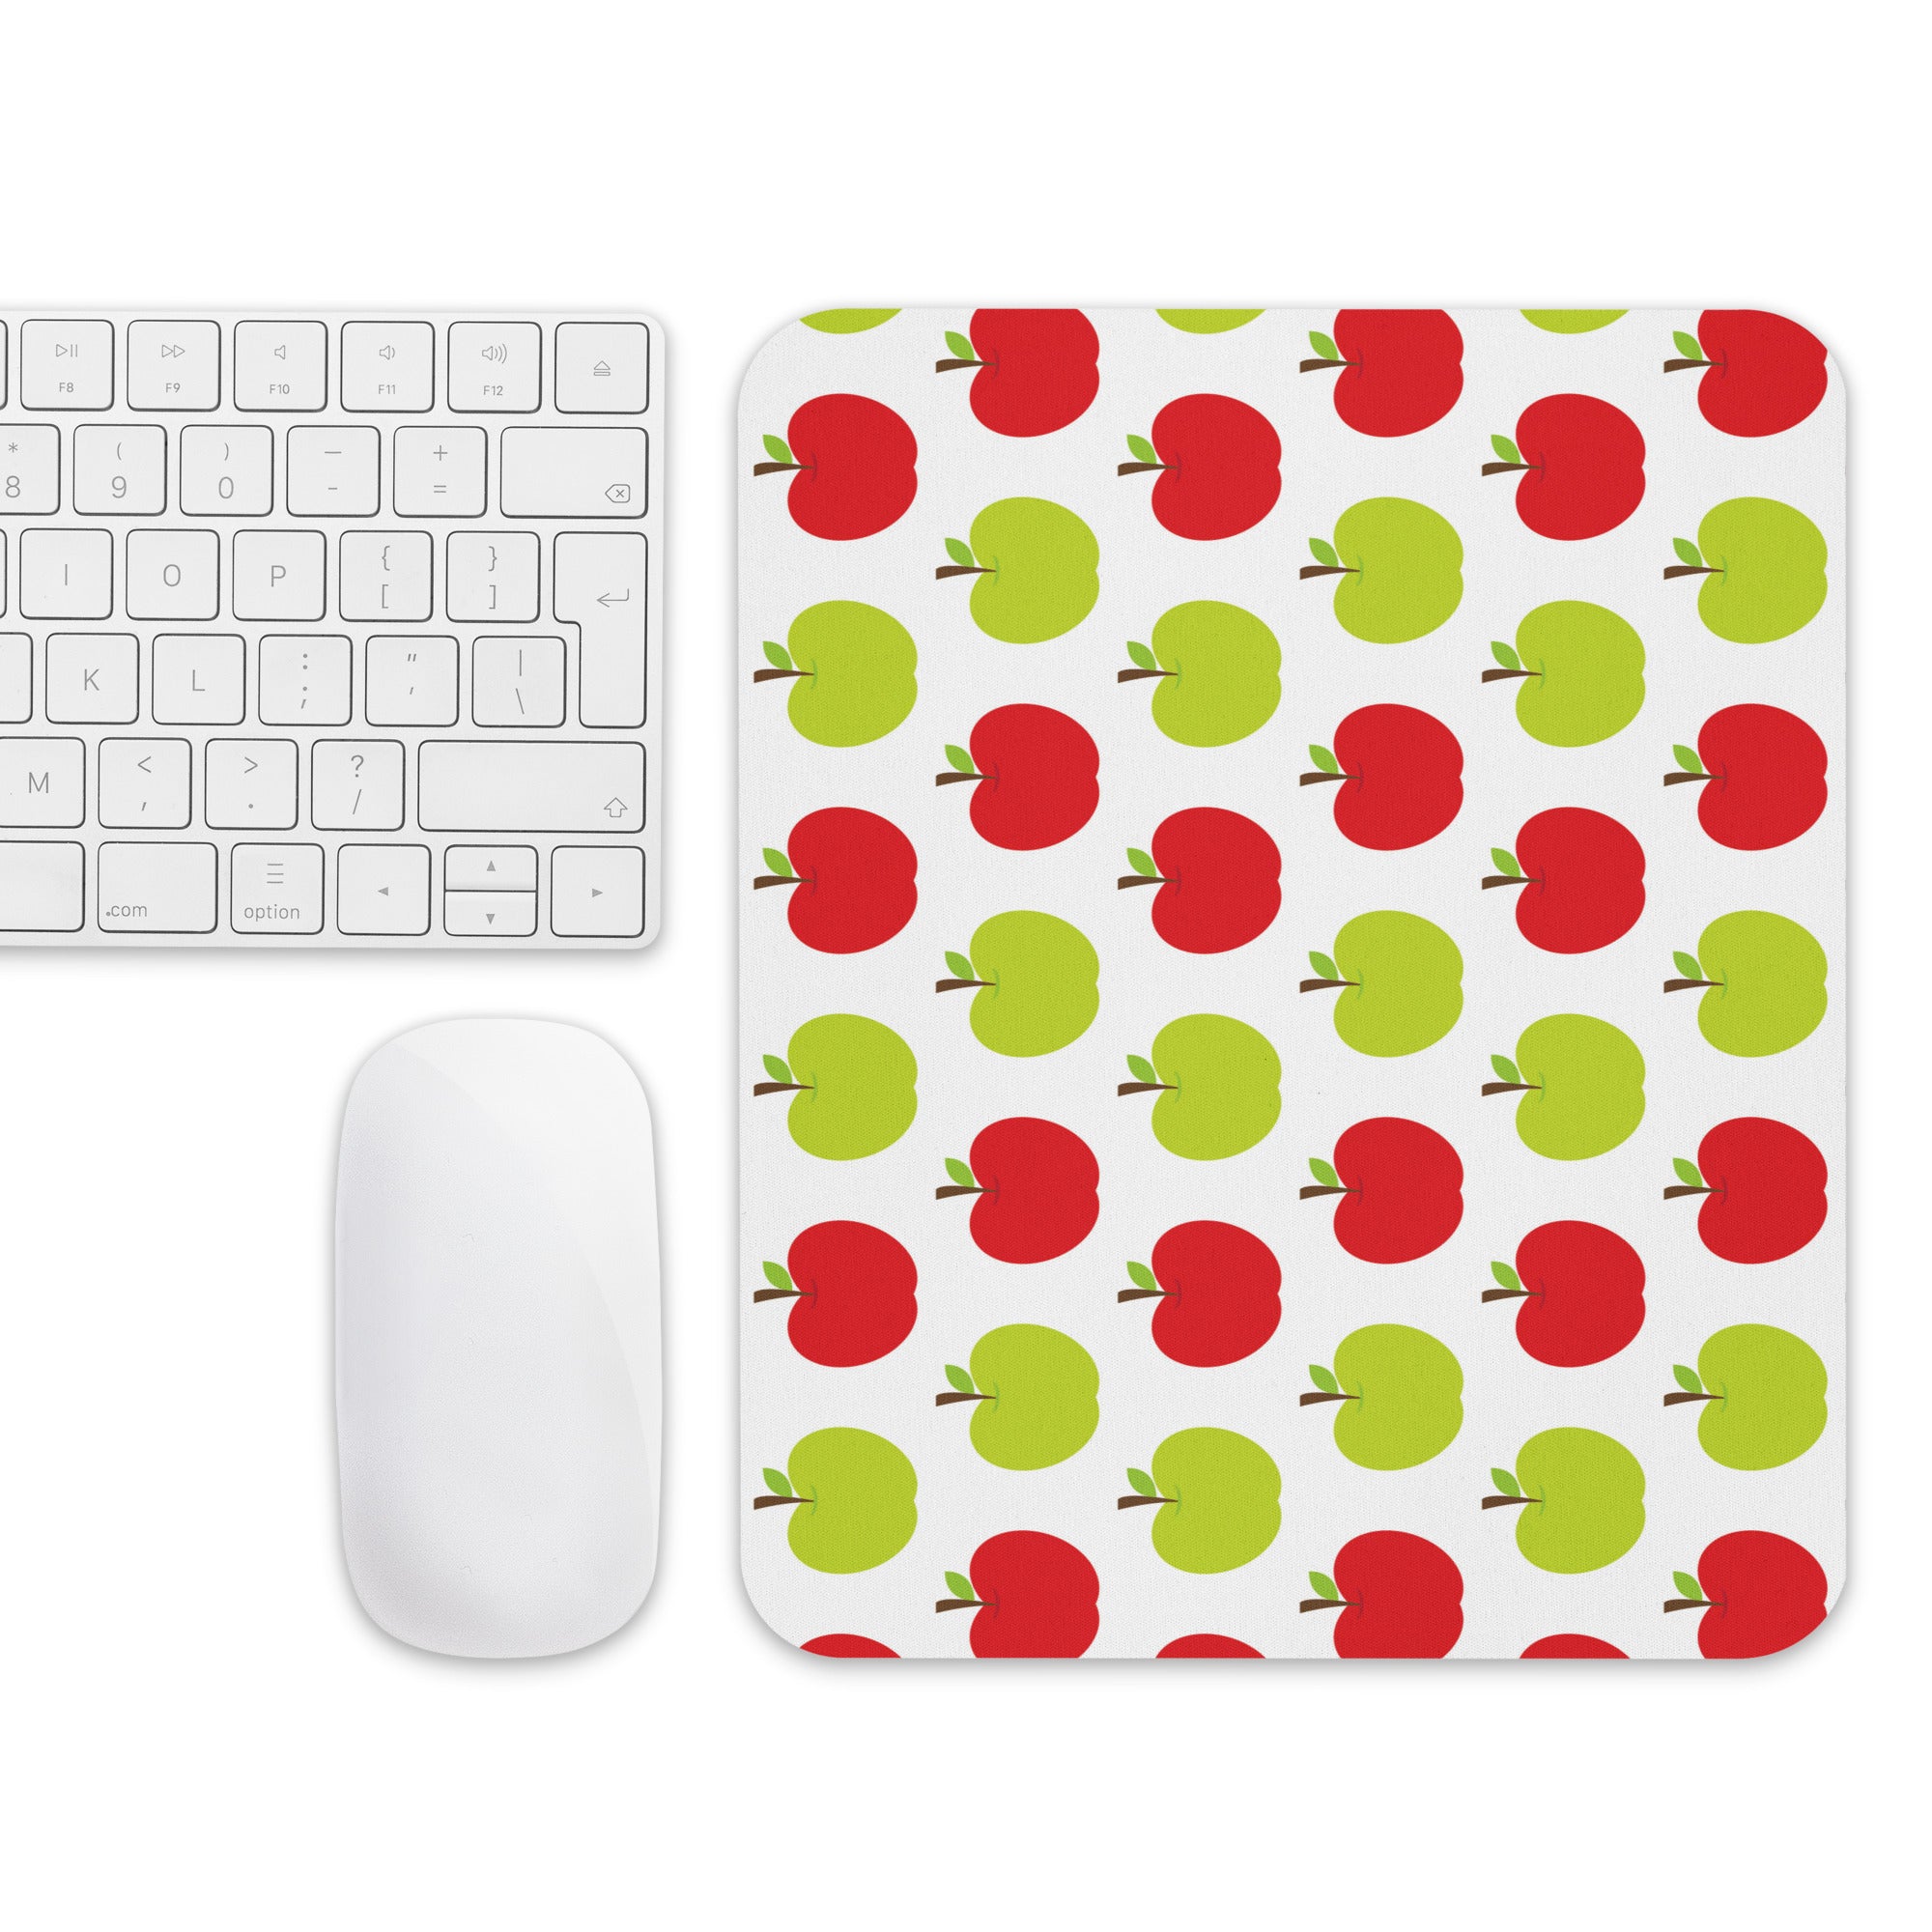 Mouse pad, Apple Pad, Back to school